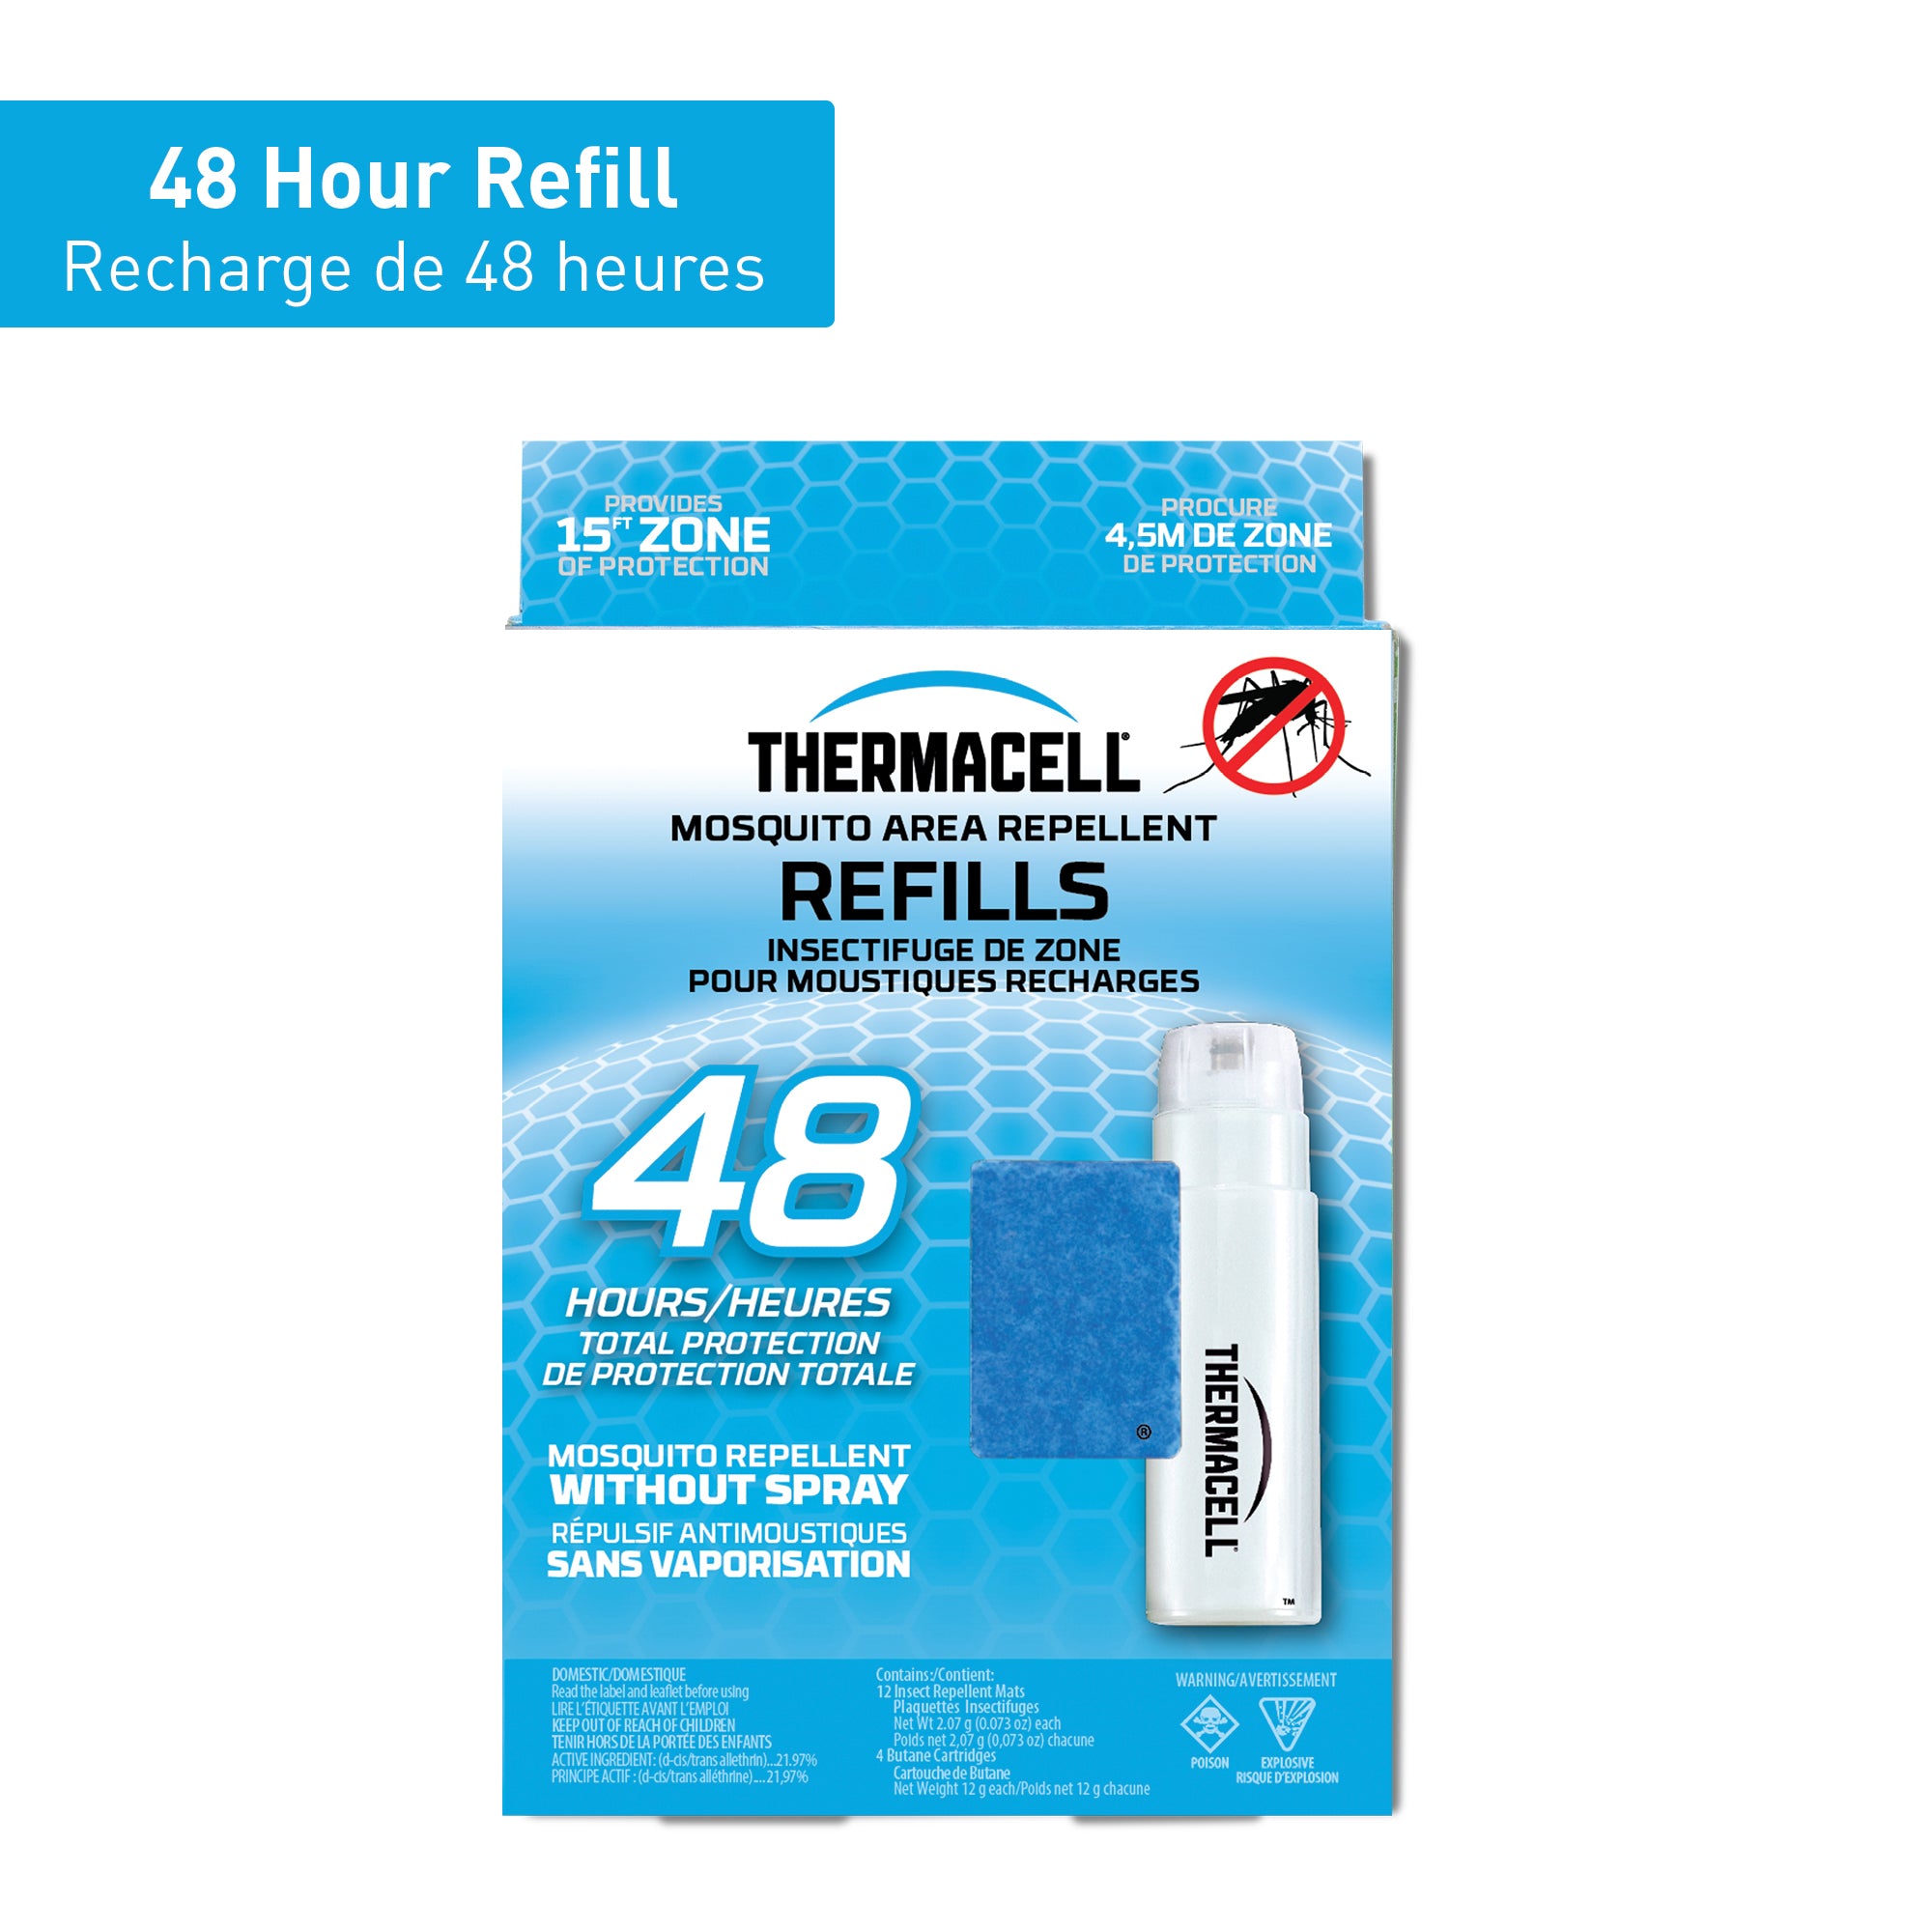 Recharge pour appareil Thermacell||Original Thermacell mosquito repellent refills